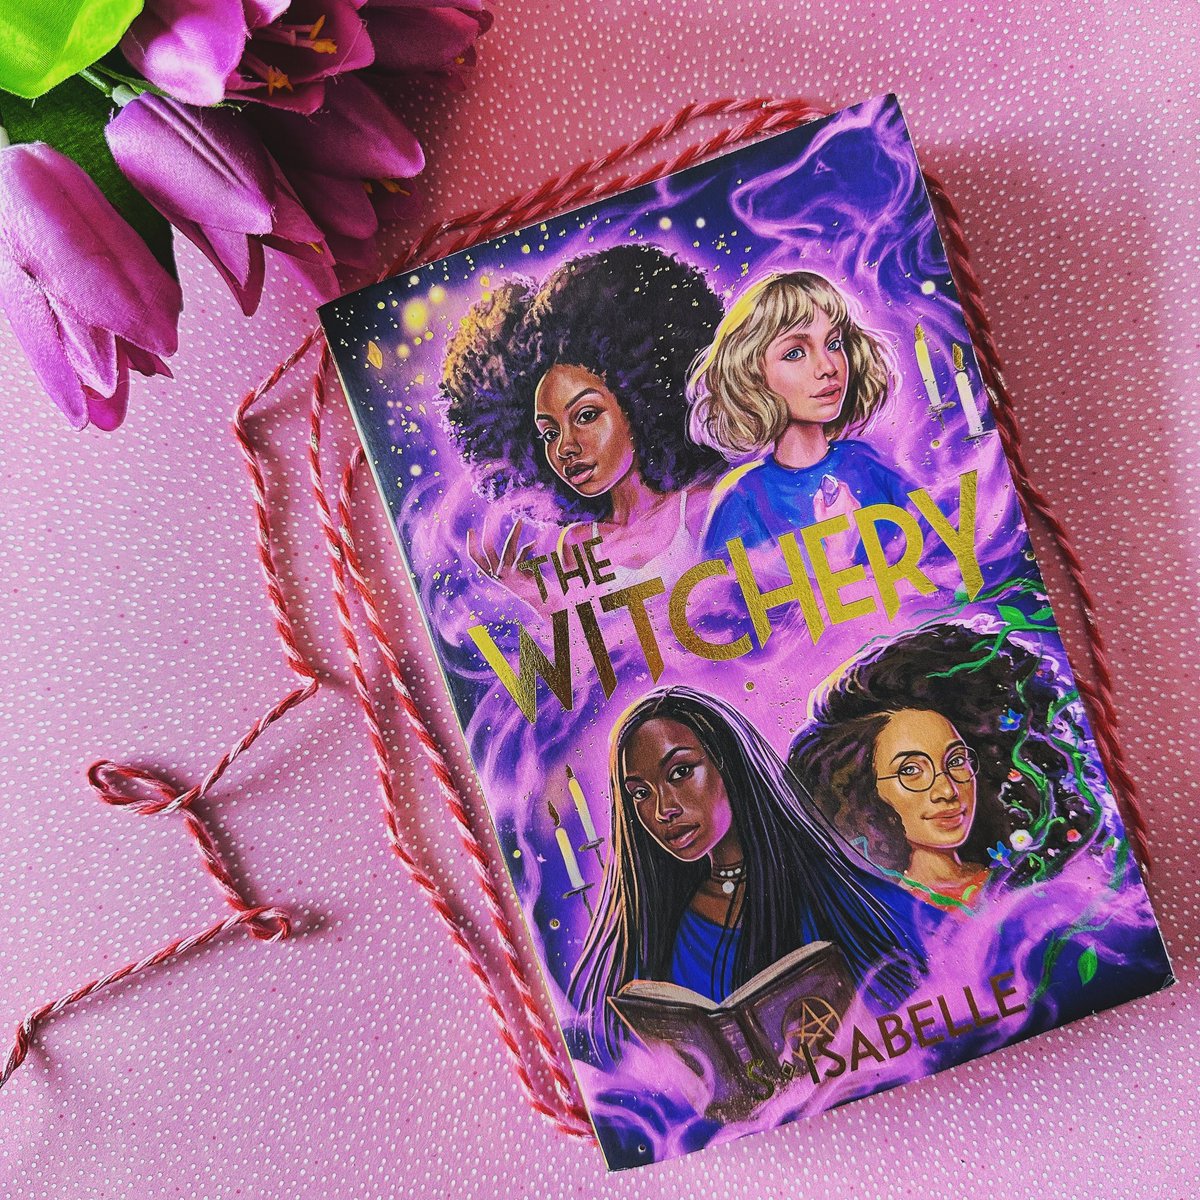 Super excited to read February’s #yabookclub2023 💜

The Witchery by @sisabellewrites was chosen and it sounds all kinds of magical ✨ 

I can’t wait to chat with @yaundermyskin about this one! 💜